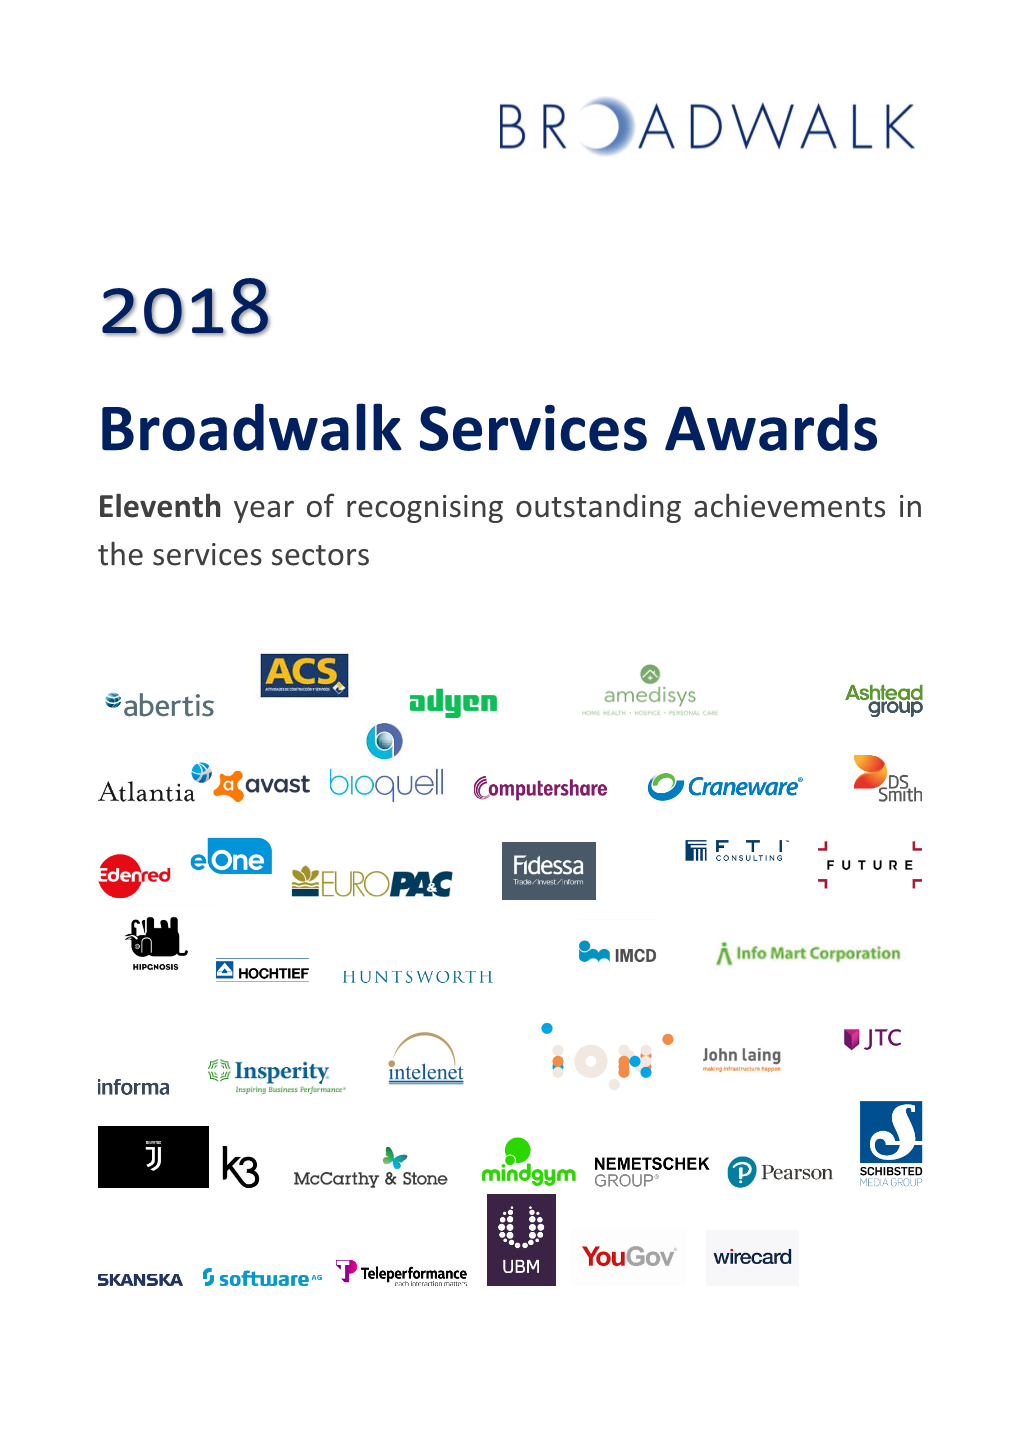 Broadwalk Services Awards Eleventh Year of Recognising Outstanding Achievements in the Services Sectors